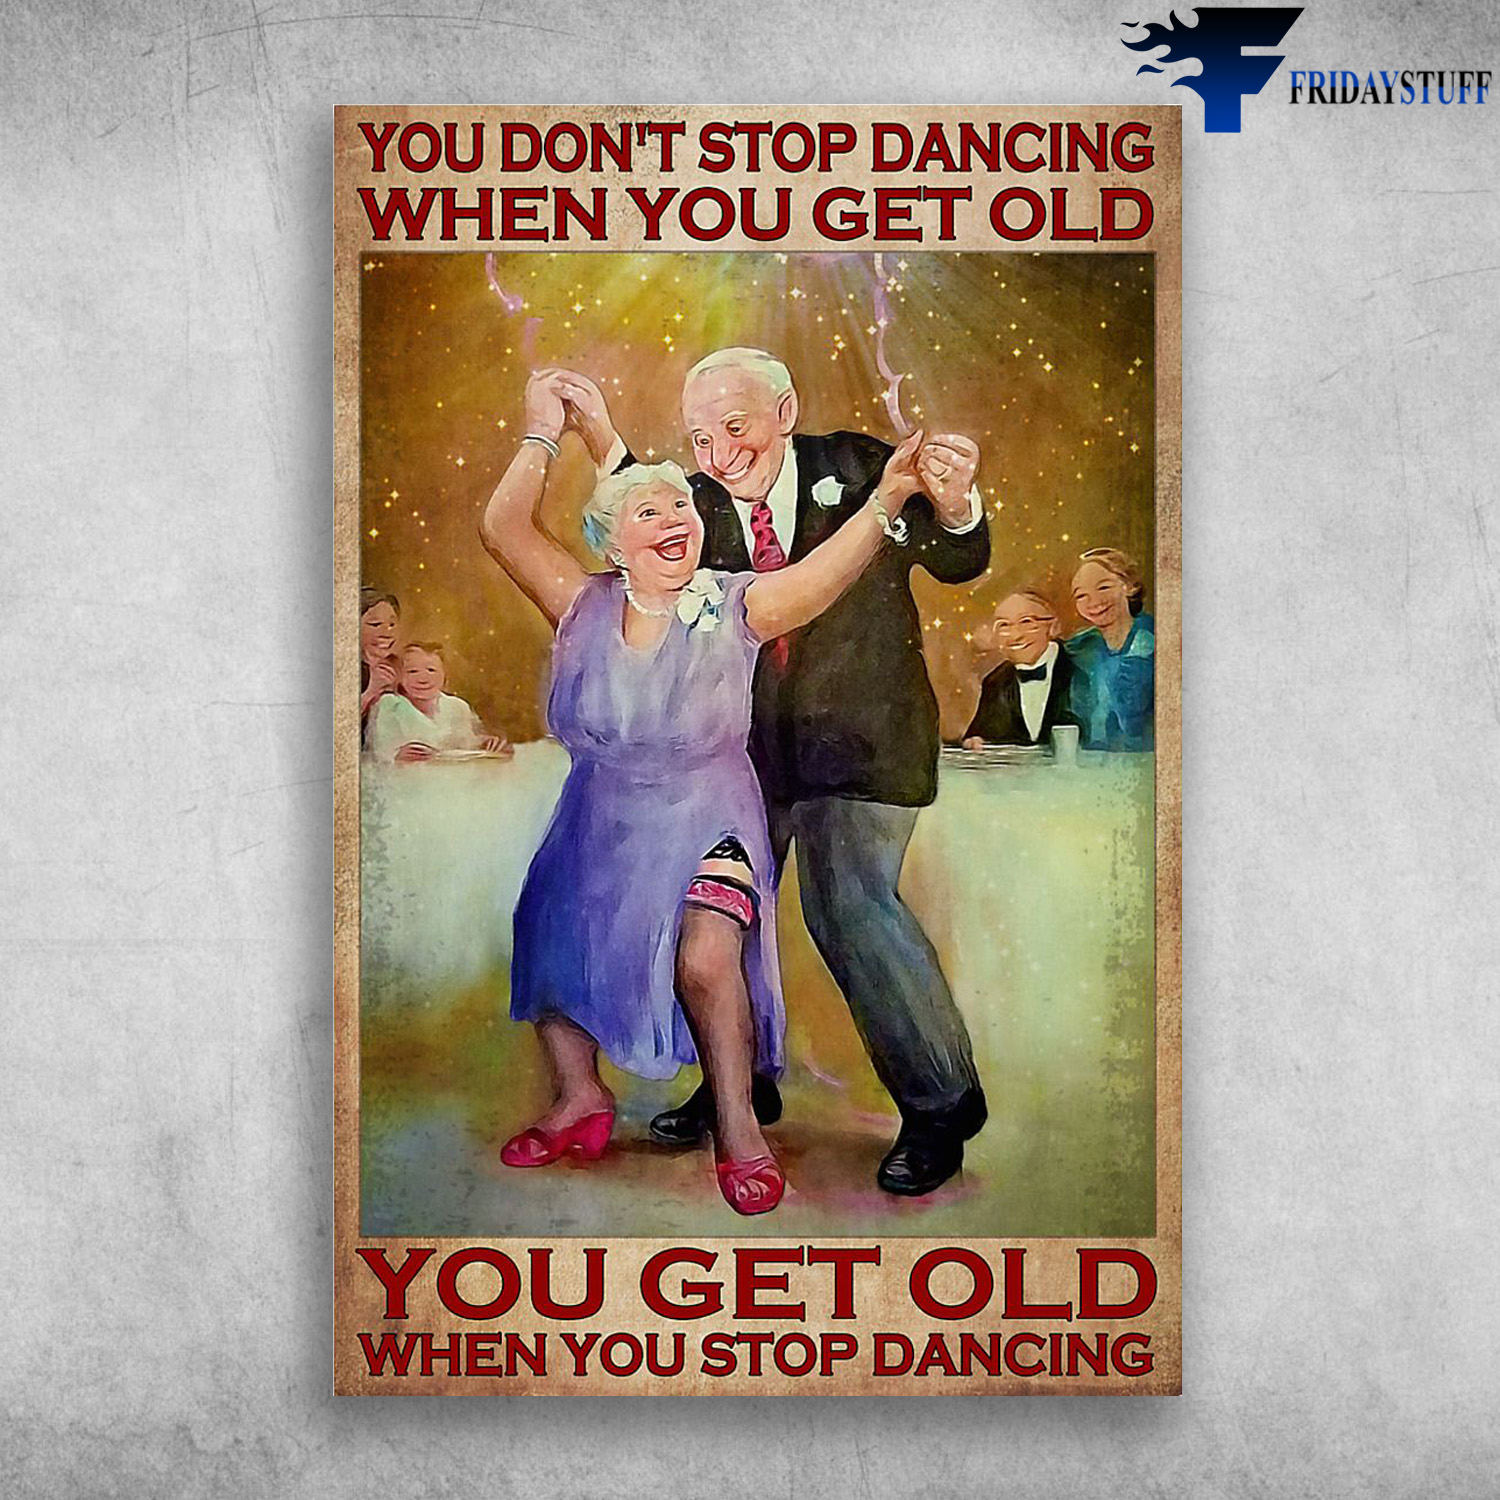 Old Couple Are Dancing - You Don't Stop Dancing When You Get Old, You Get Old When You Stop Dancing